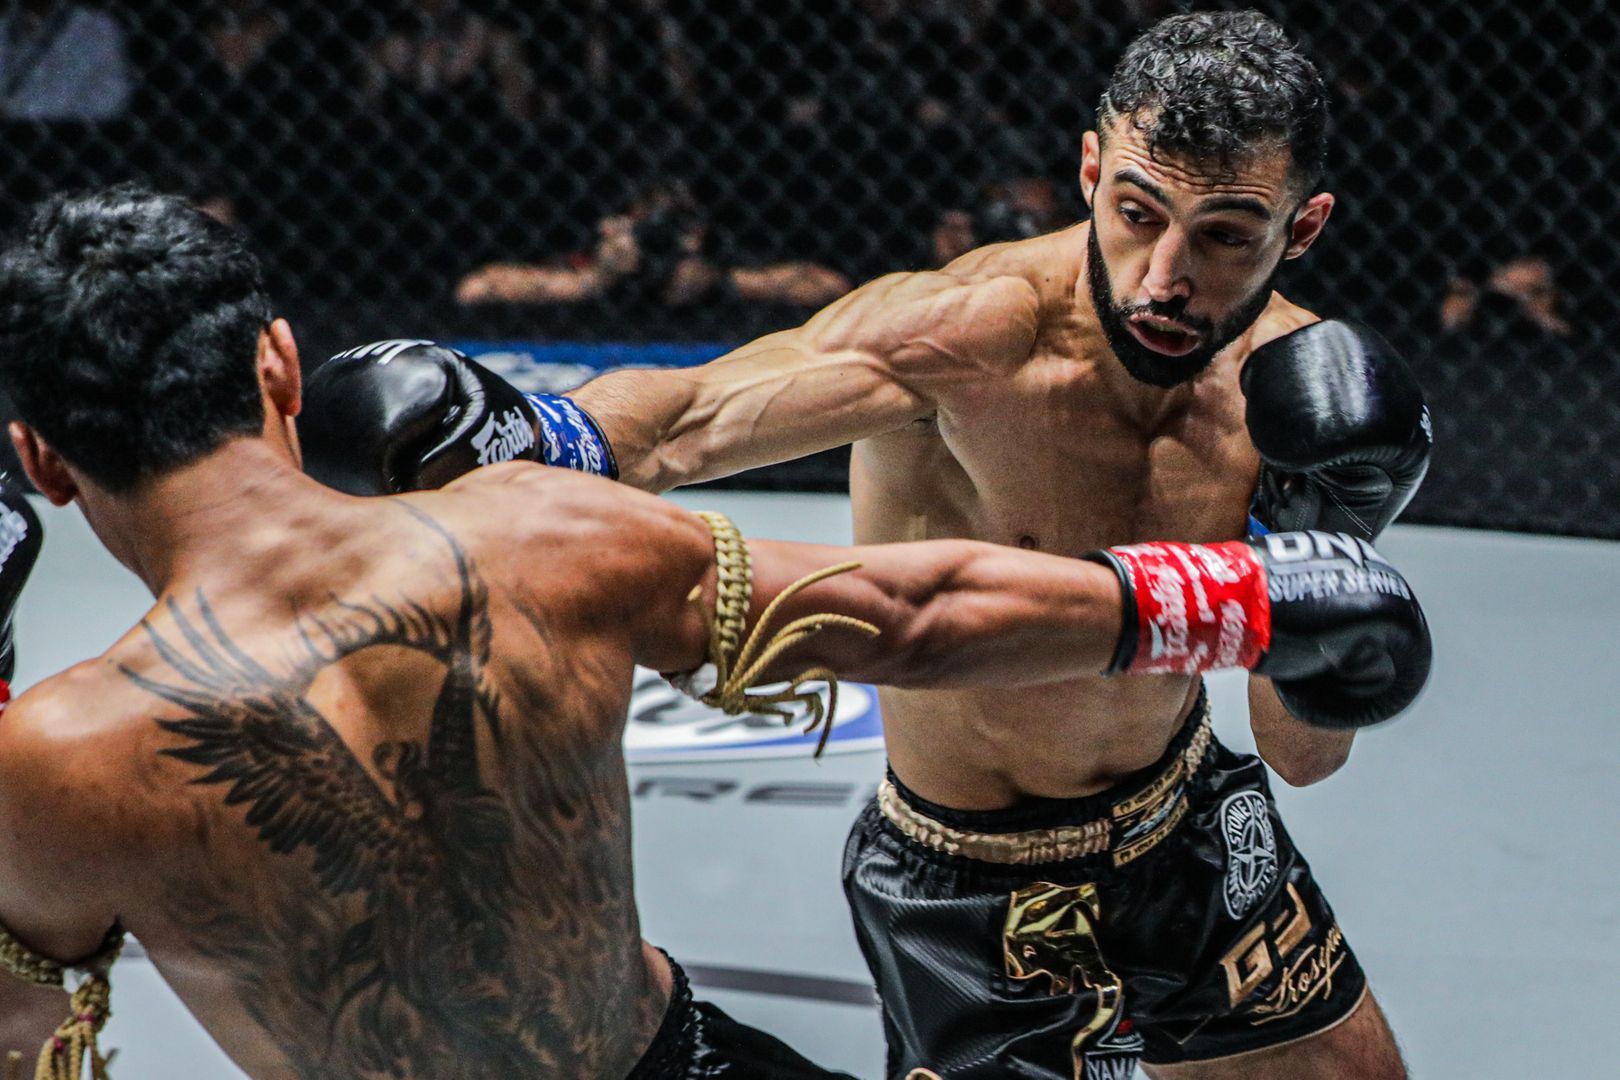 Italy's Giorgio Petrosyan connects with a jab on Jo Nattawut in Bangkok